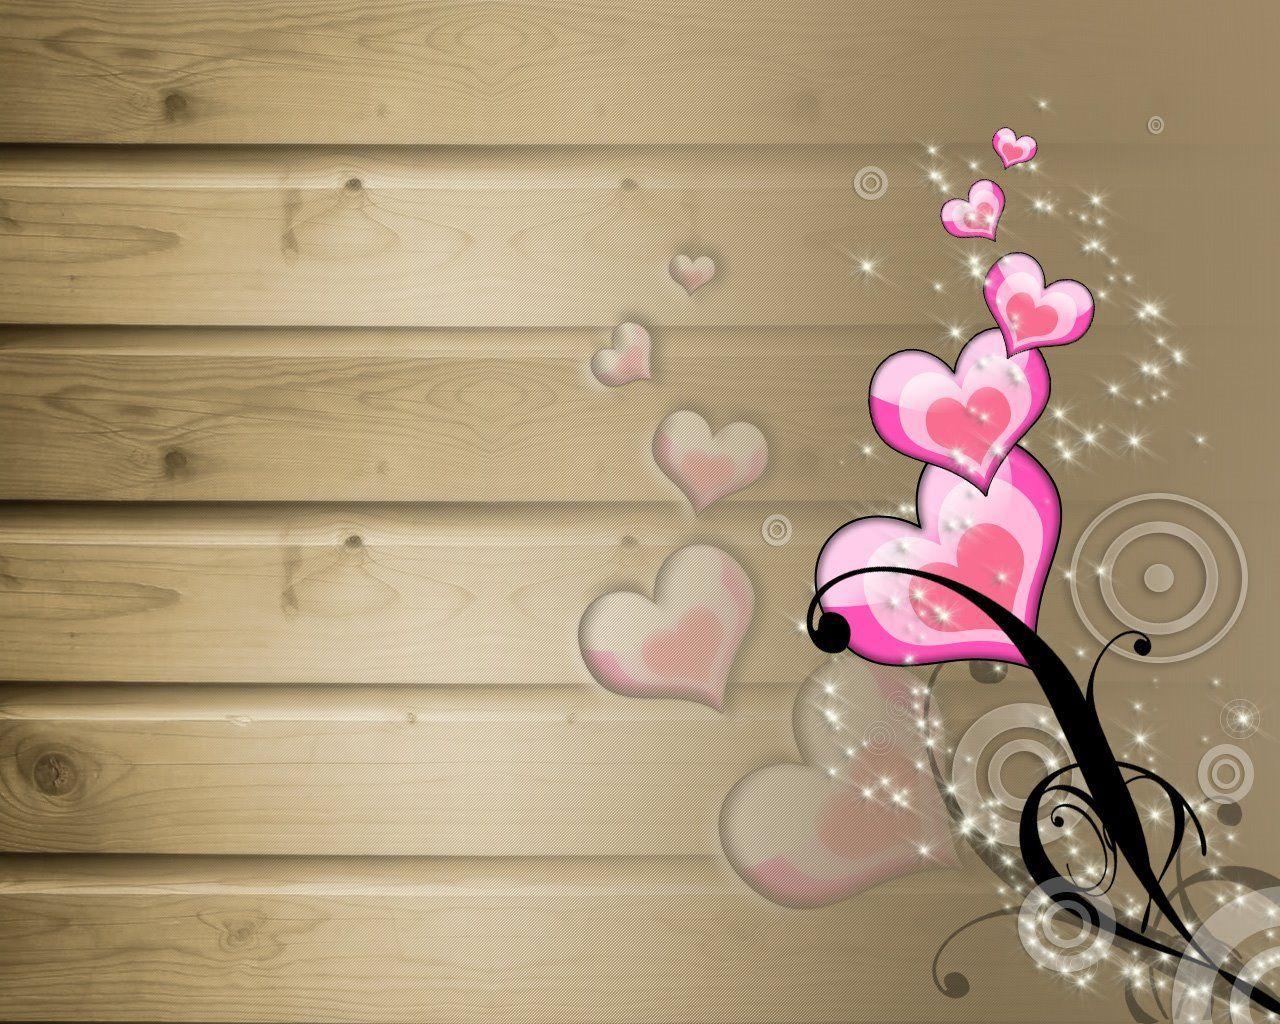 Wallpaper For > Pink Hearts Background Wallpaper